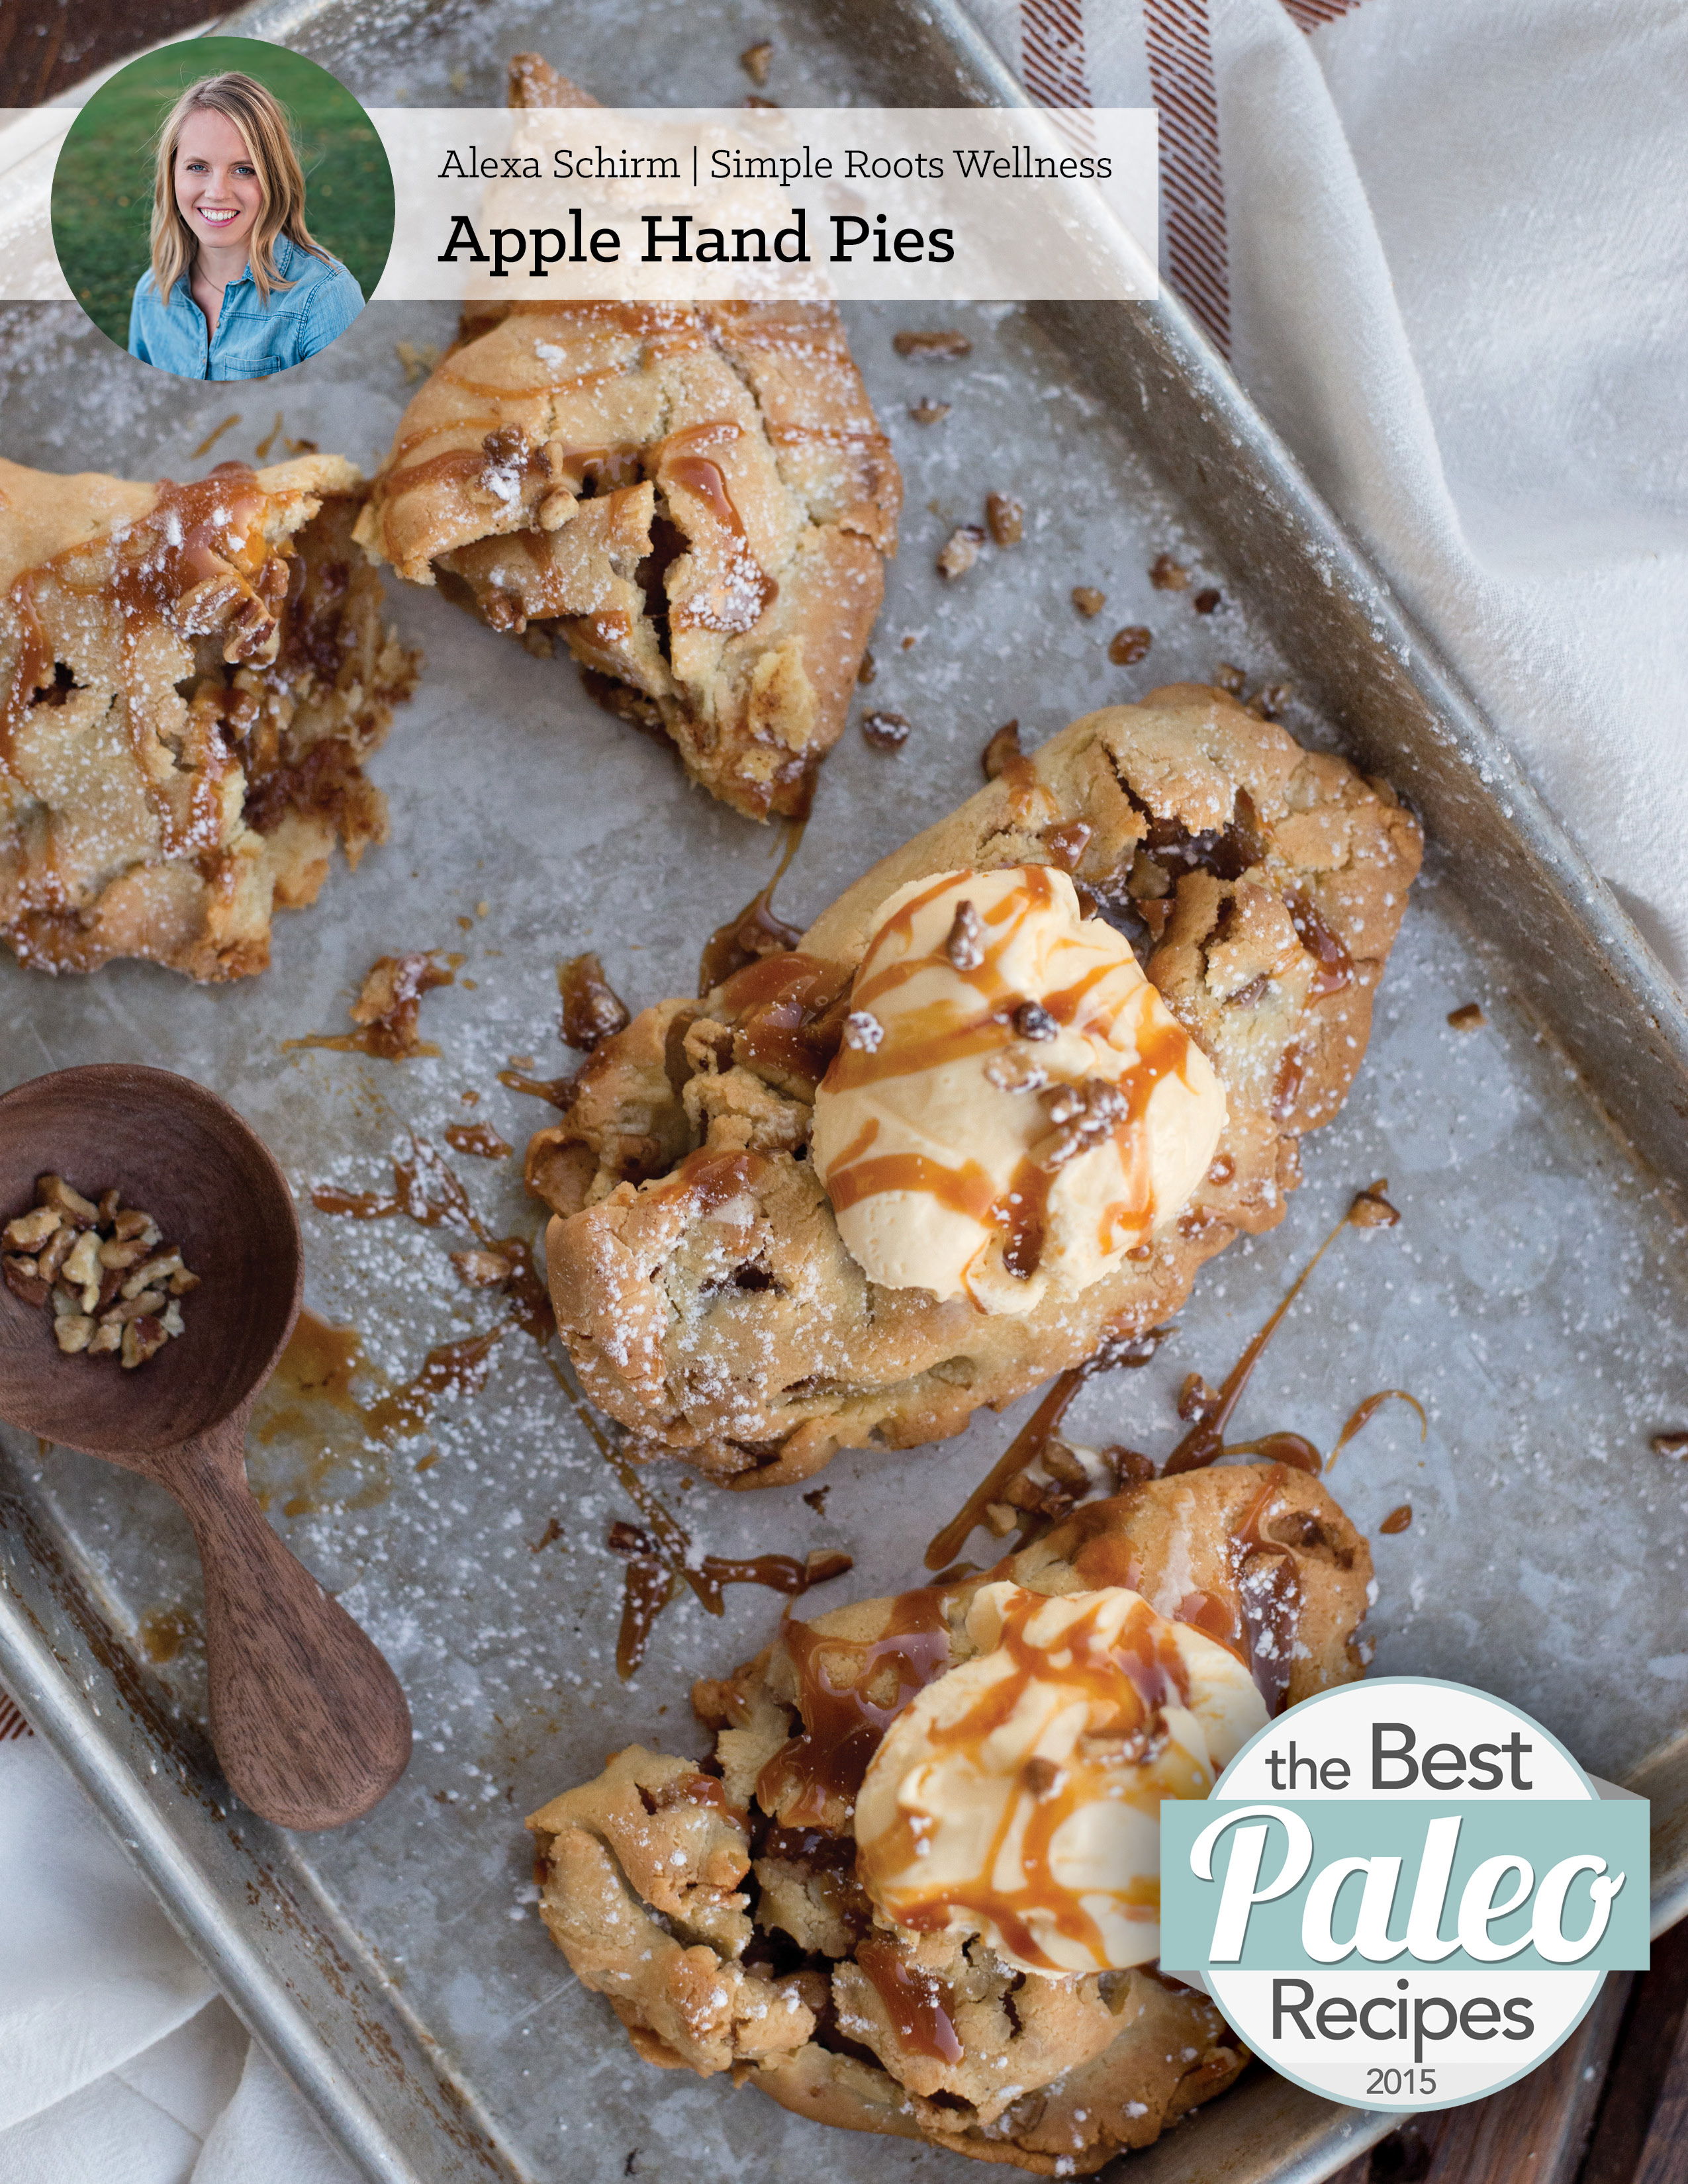 These Apple Hand Pies are exclusive to the Best of Paleo 2015 cookbook and can only be found here.